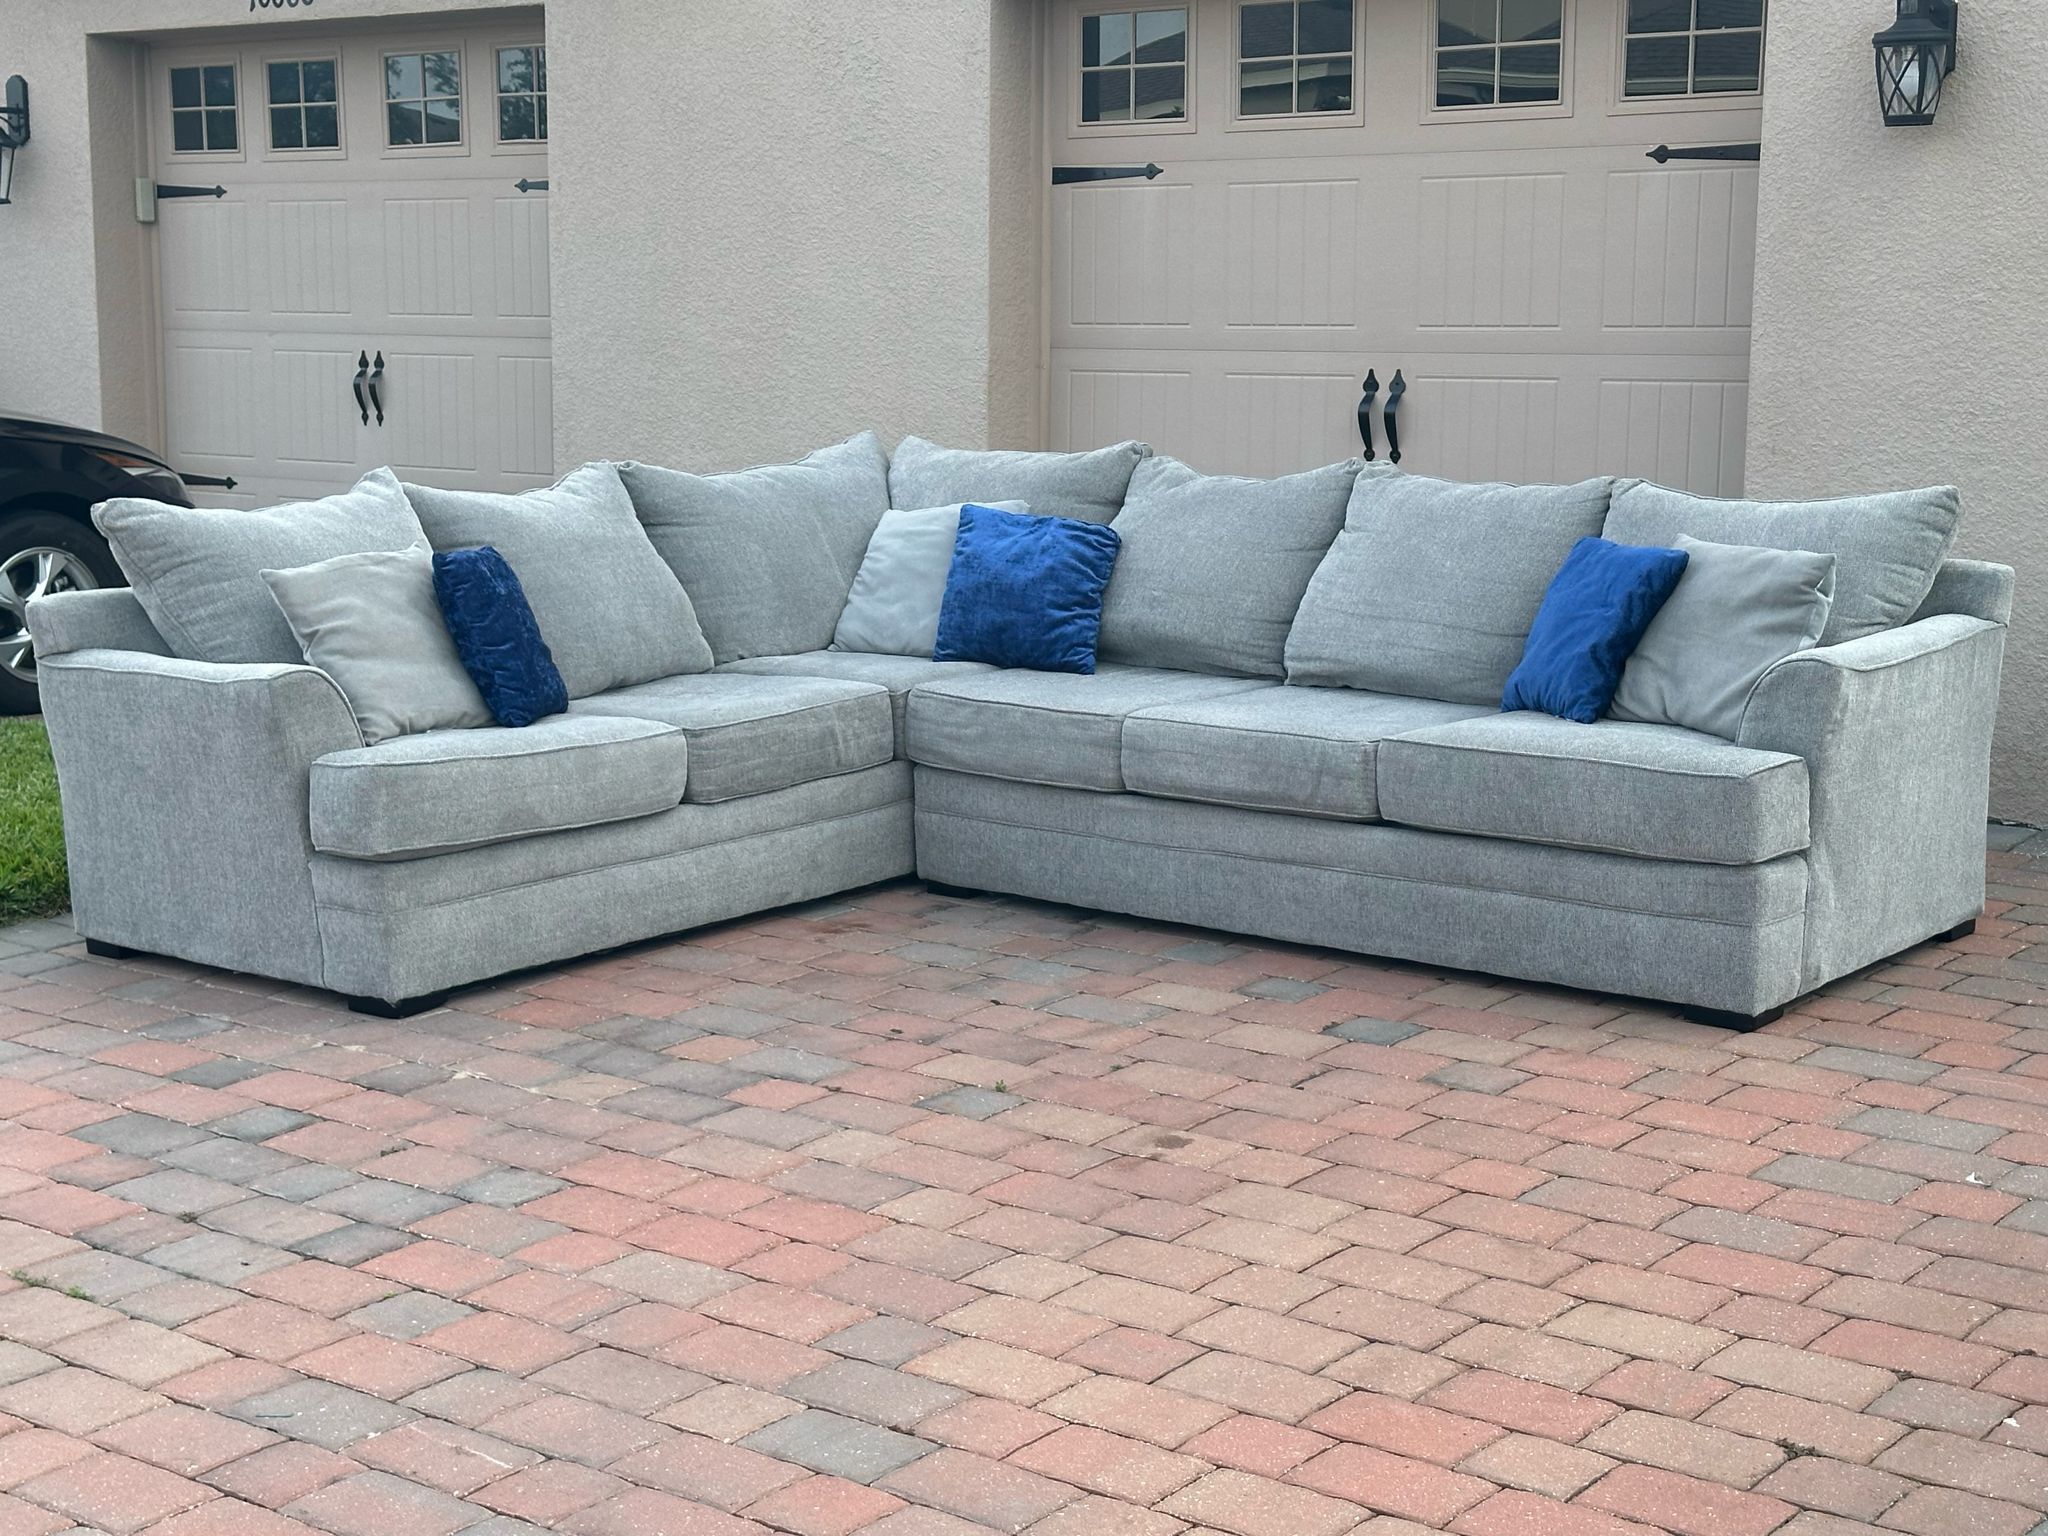 GRAY SECTIONAL COUCH - BROYHILL SOFA - GREAT CONDITION - DELIVERY AVAILABLE 🚚